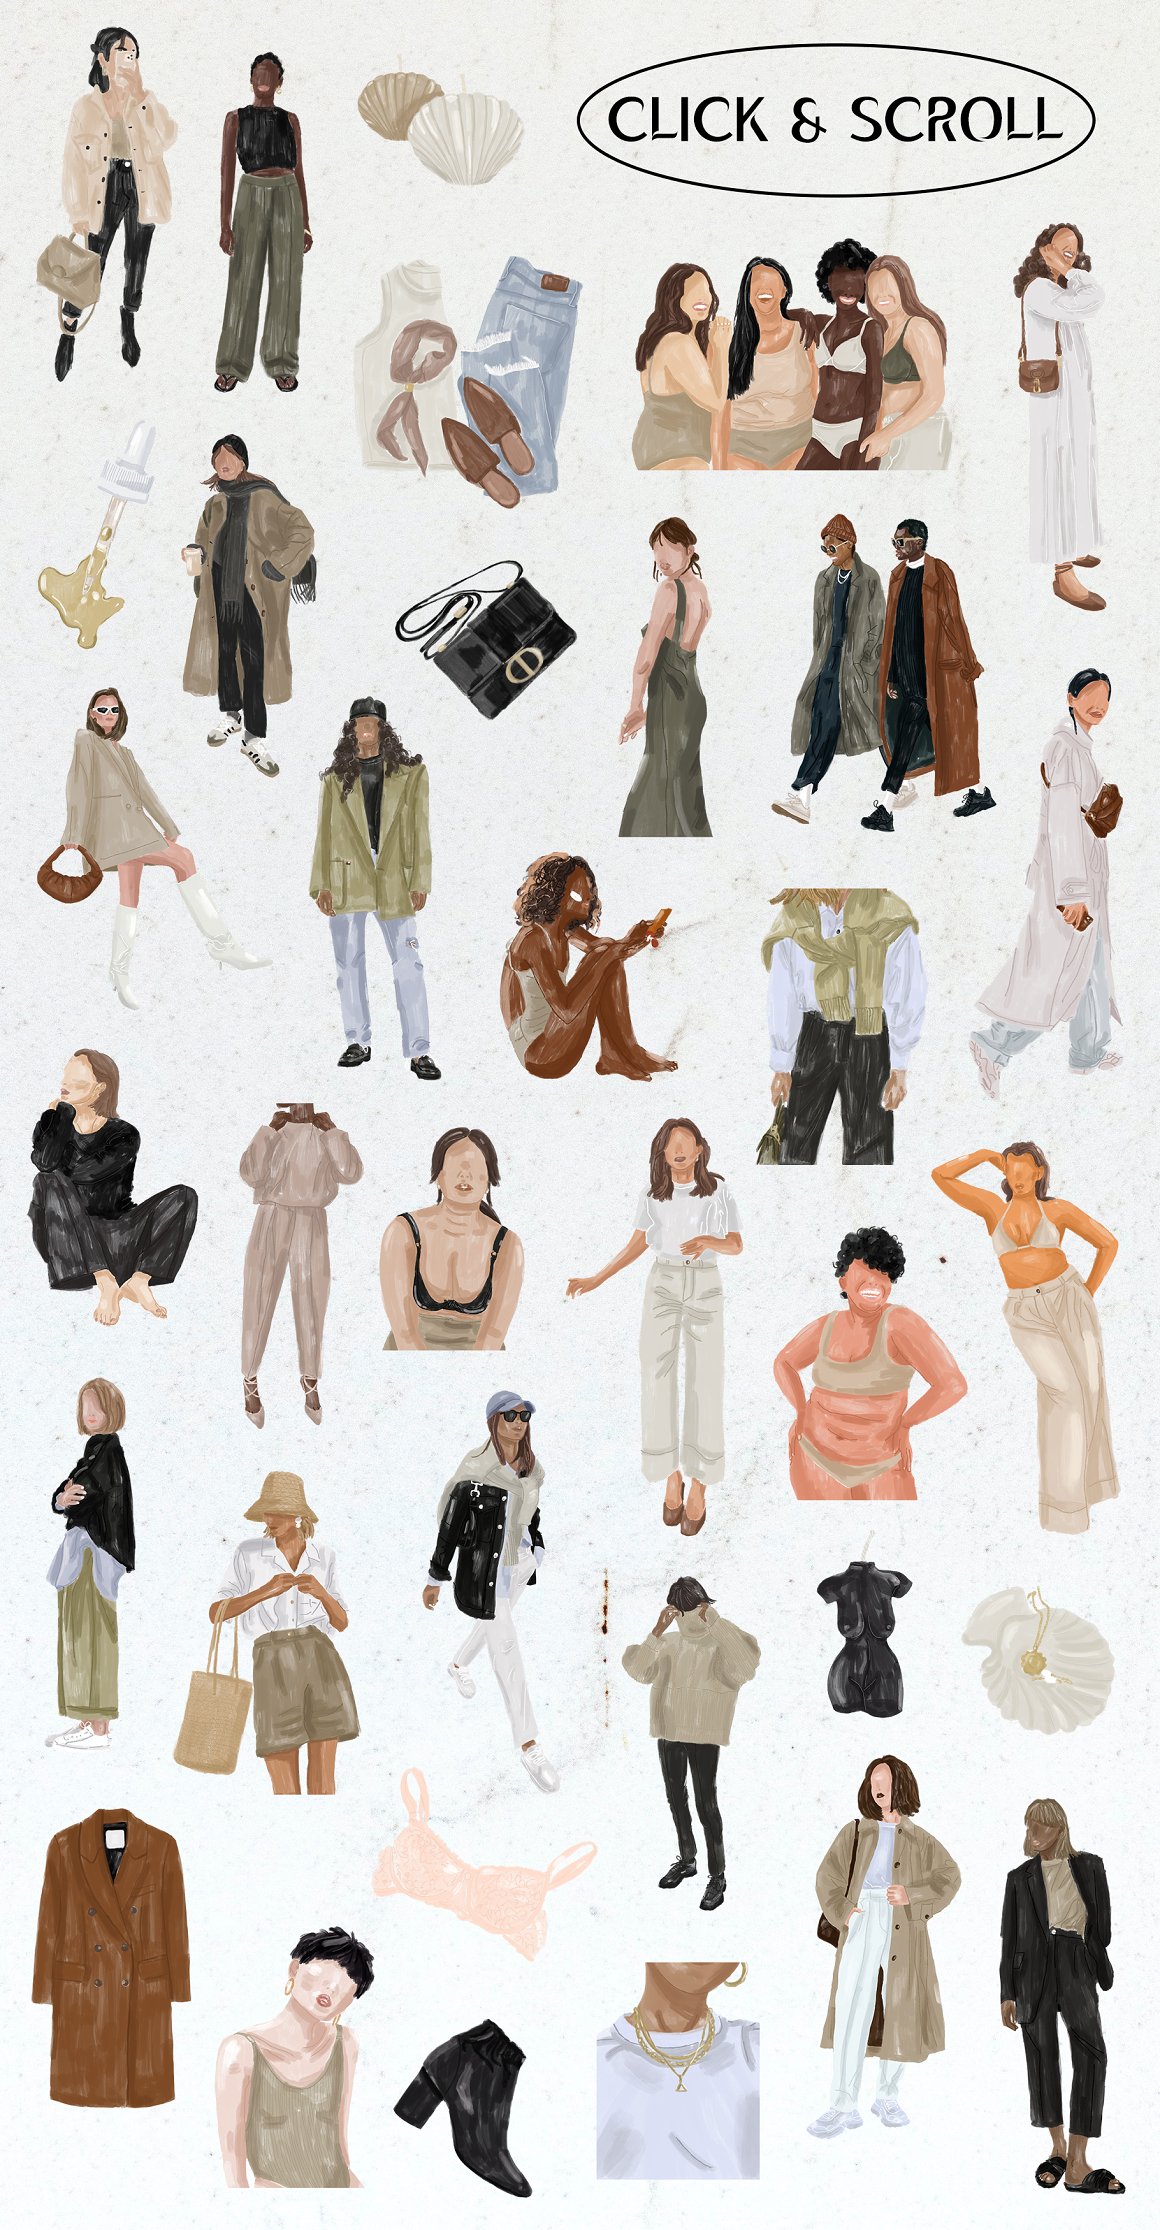 Images of people and clothing.